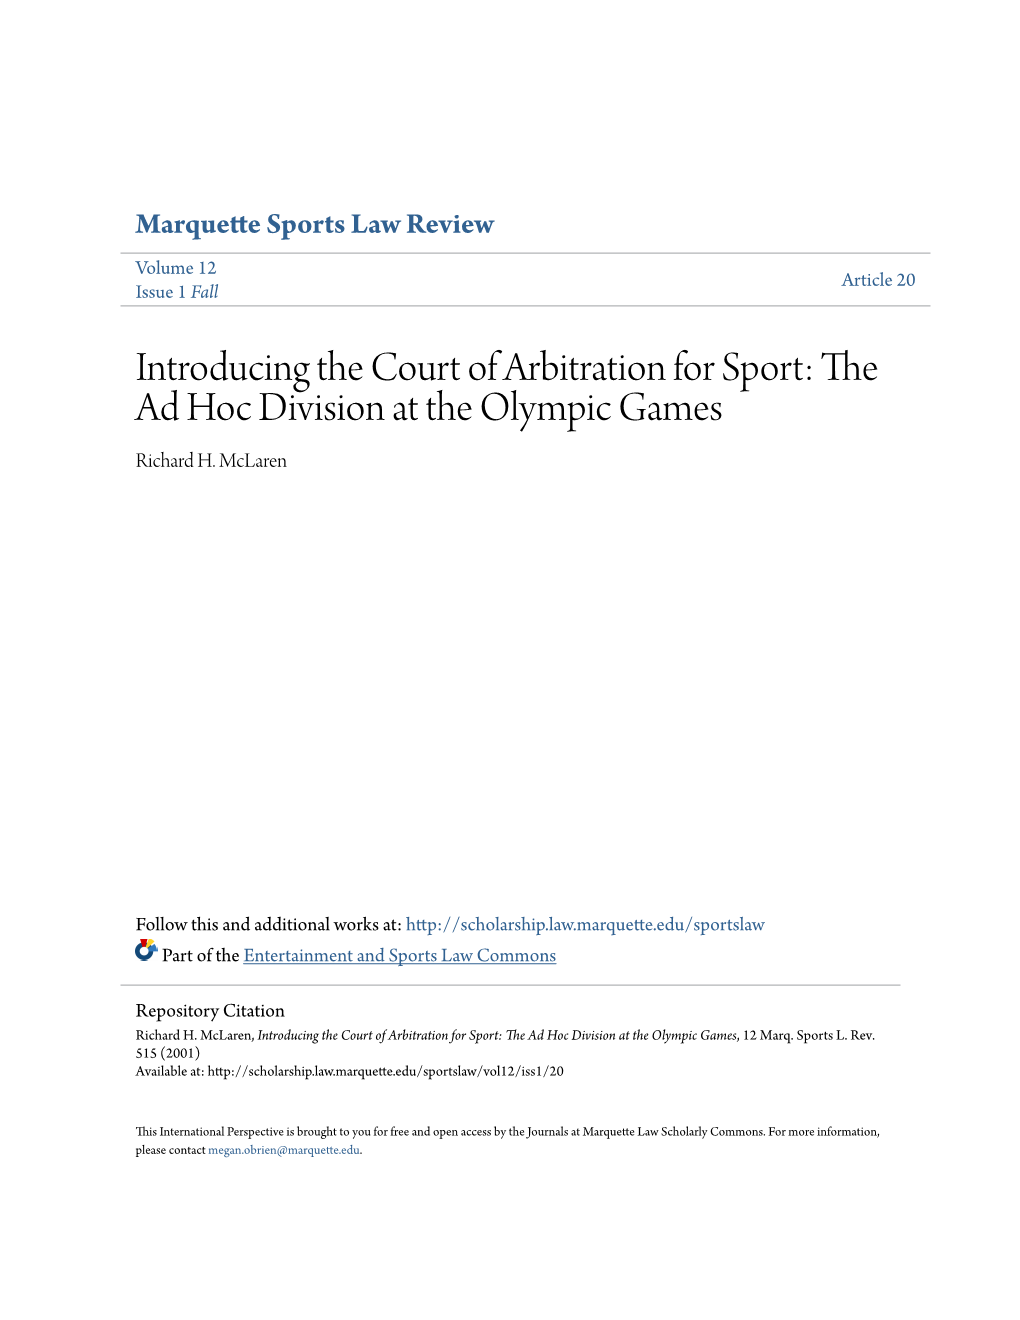 Introducing the Court of Arbitration for Sport: the Ad Hoc Division at the Olympic Games Richard H